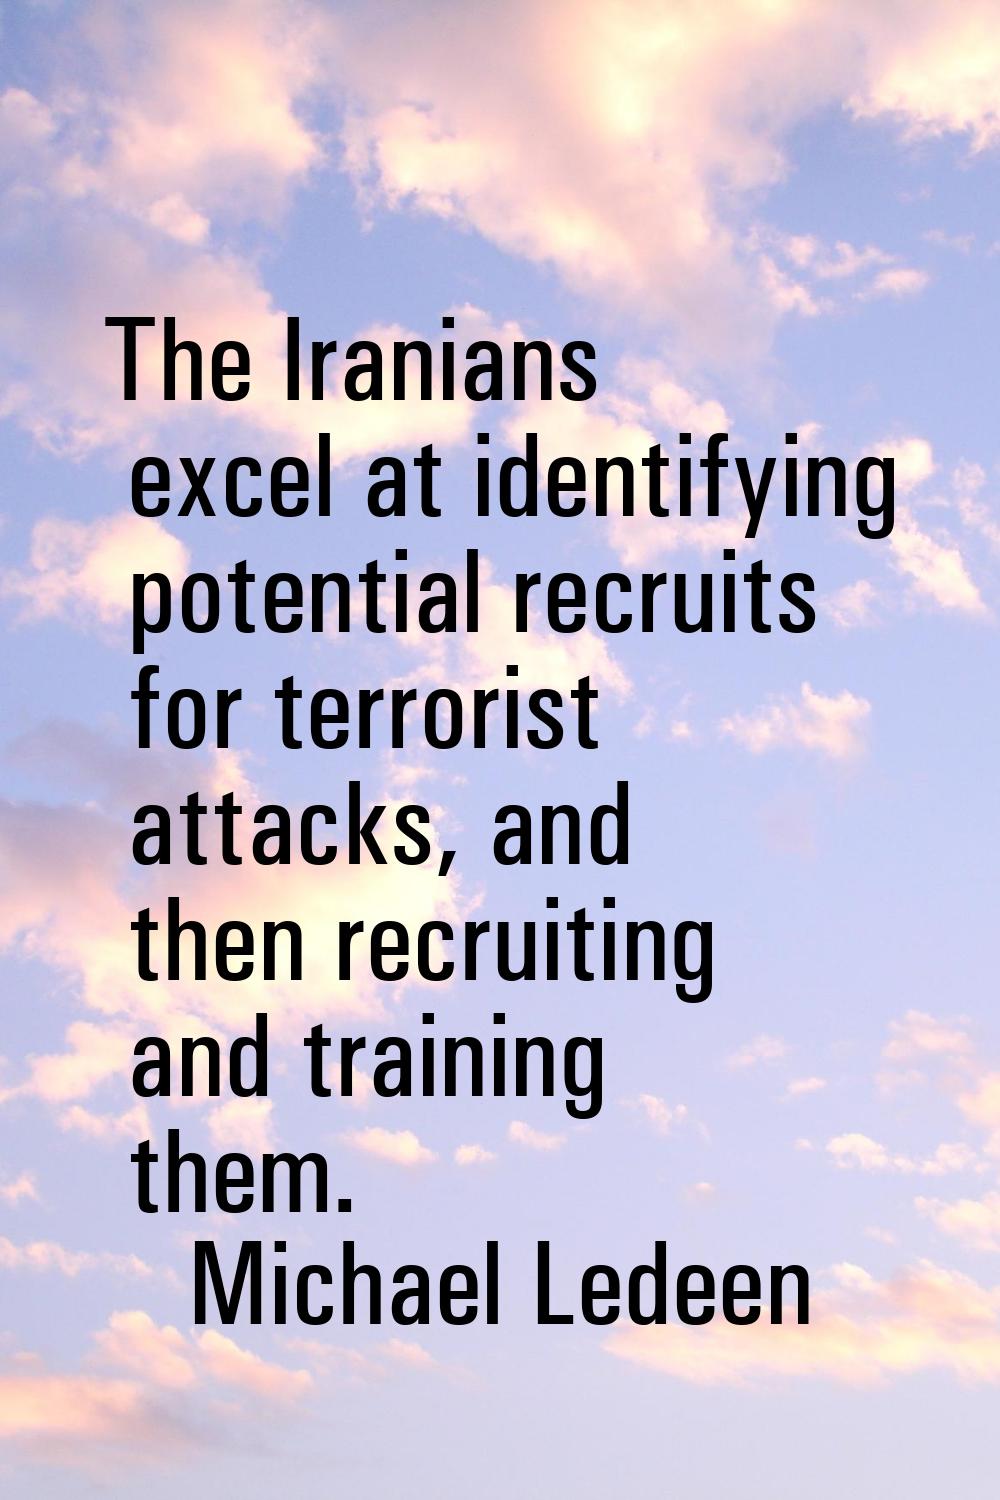 The Iranians excel at identifying potential recruits for terrorist attacks, and then recruiting and